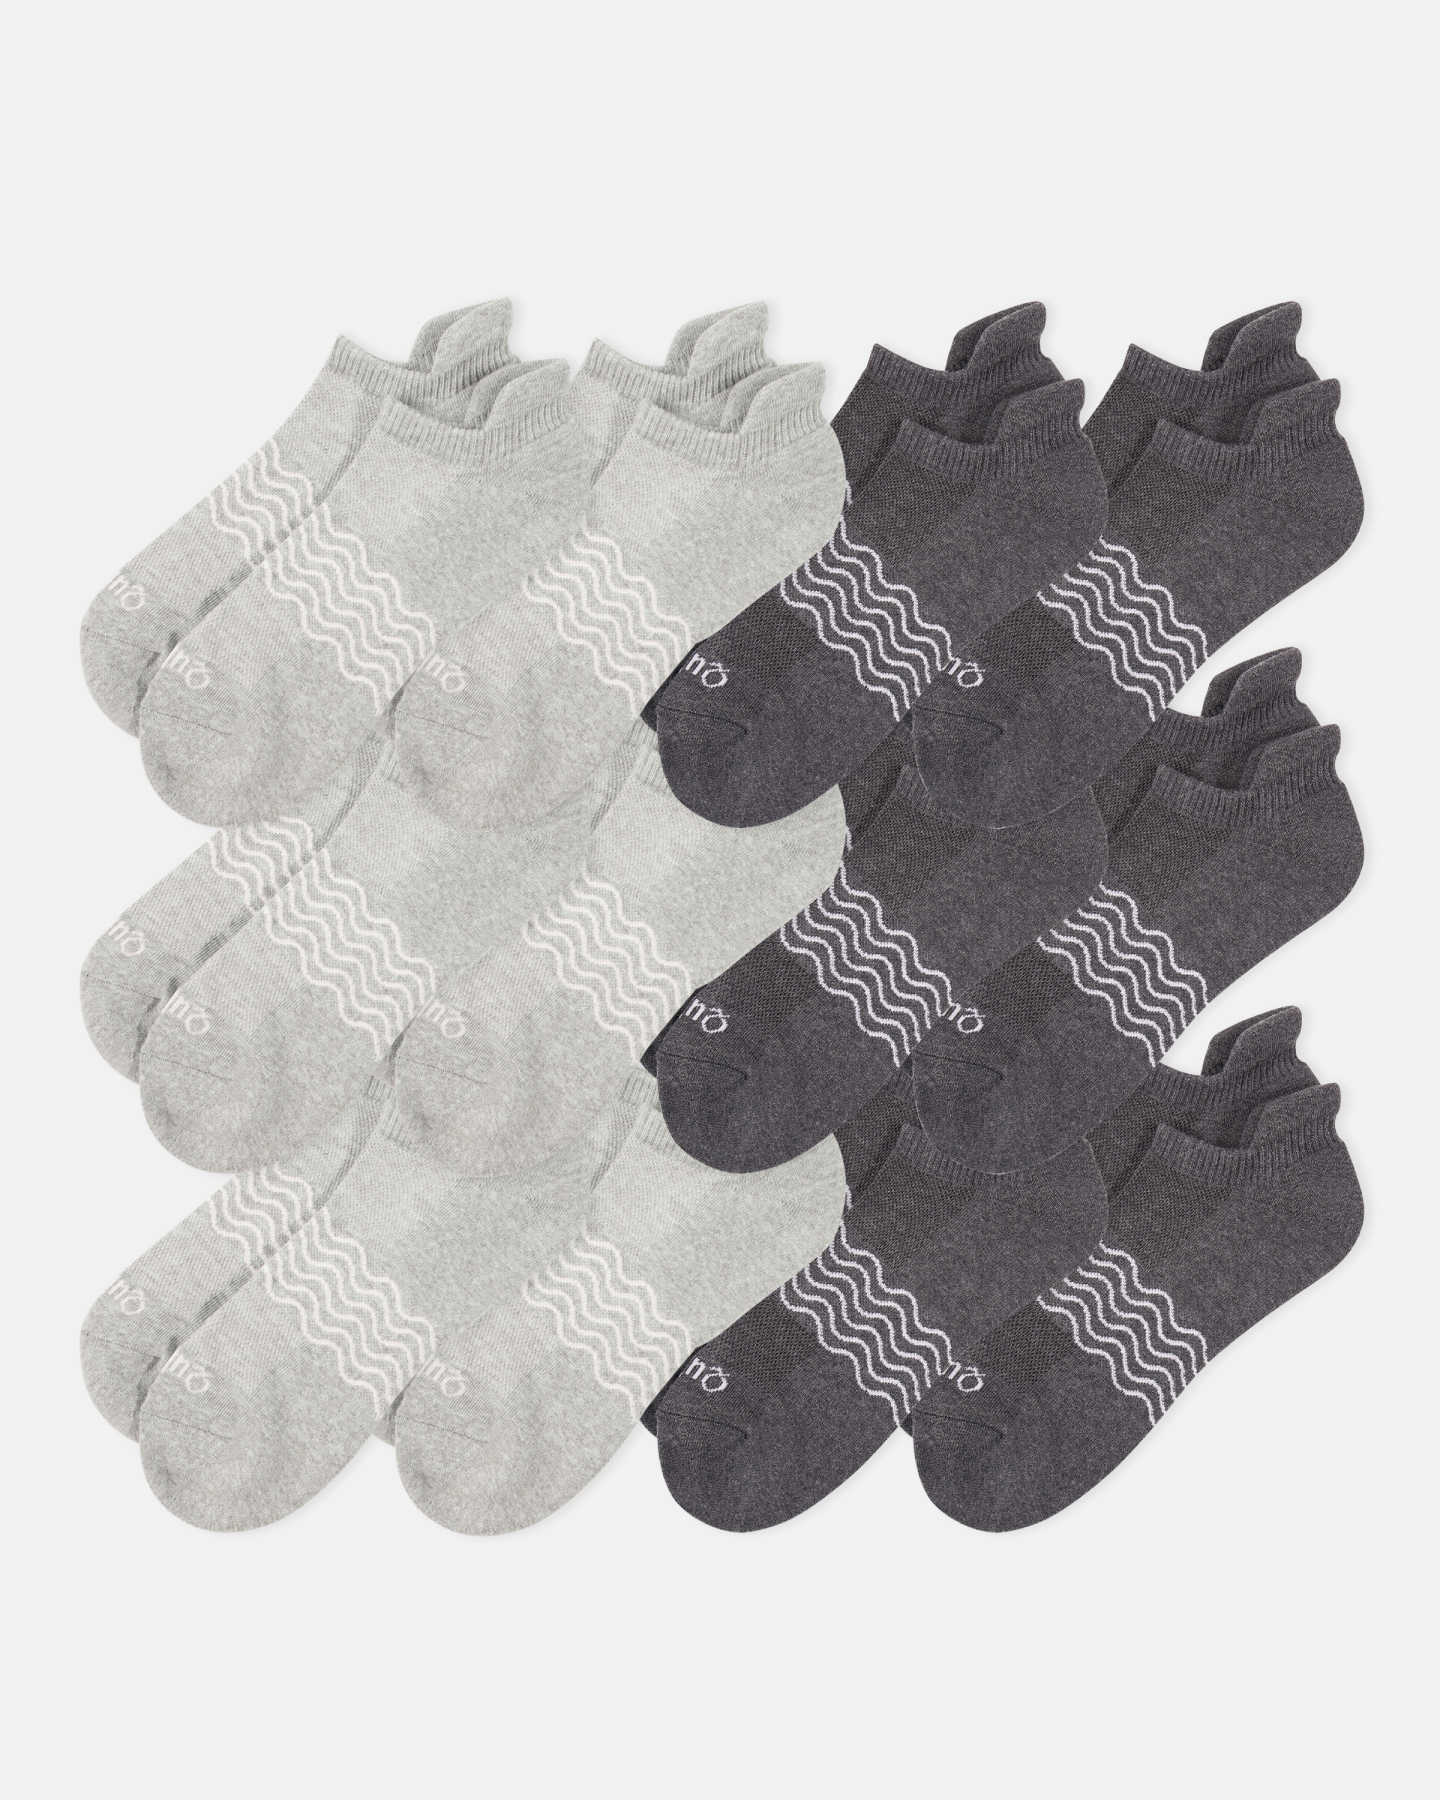 You May Also Like - Organic Ankle Socks (12-pack) - Grey/Charcoal